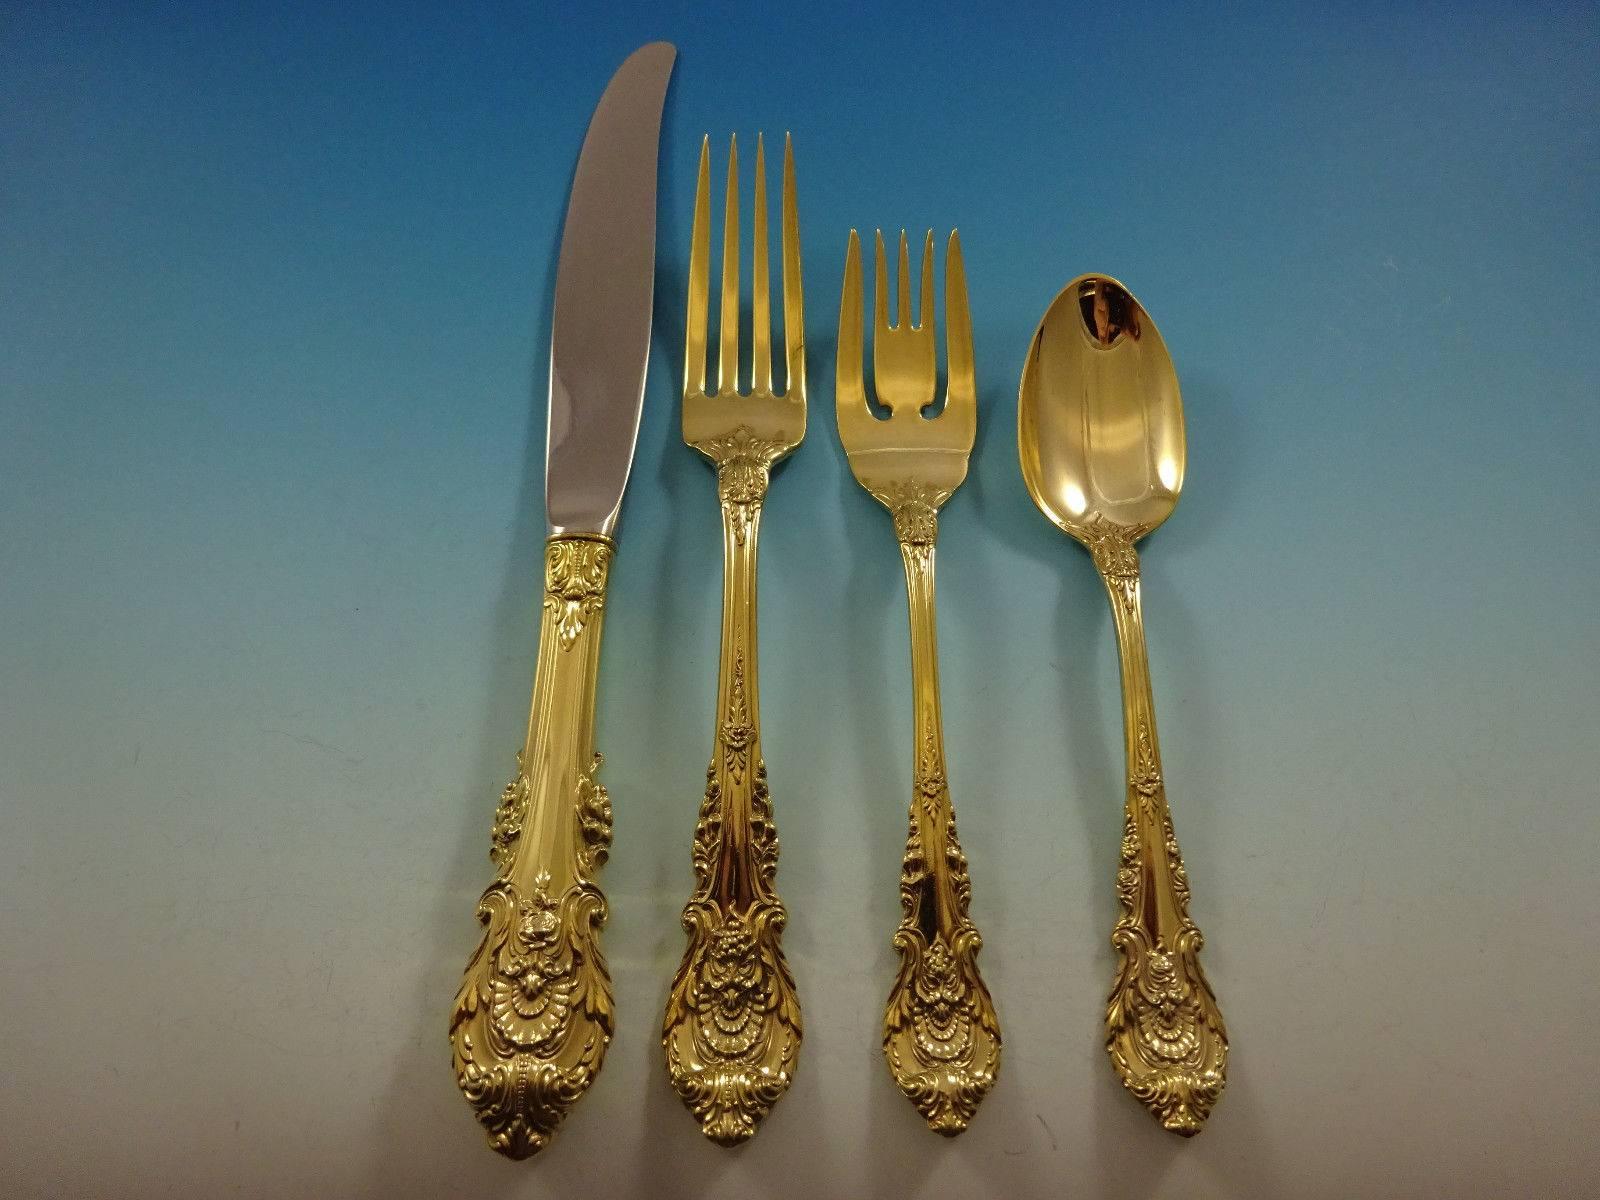 Gorgeous Sir Christopher Gold by Wallace sterling silver flatware set of 48 pieces. Gold flatware is on trend and makes a bold statement on your table. 

This set is vermeil (completely gold-washed) and includes:
 
12 knives, 9 1/8